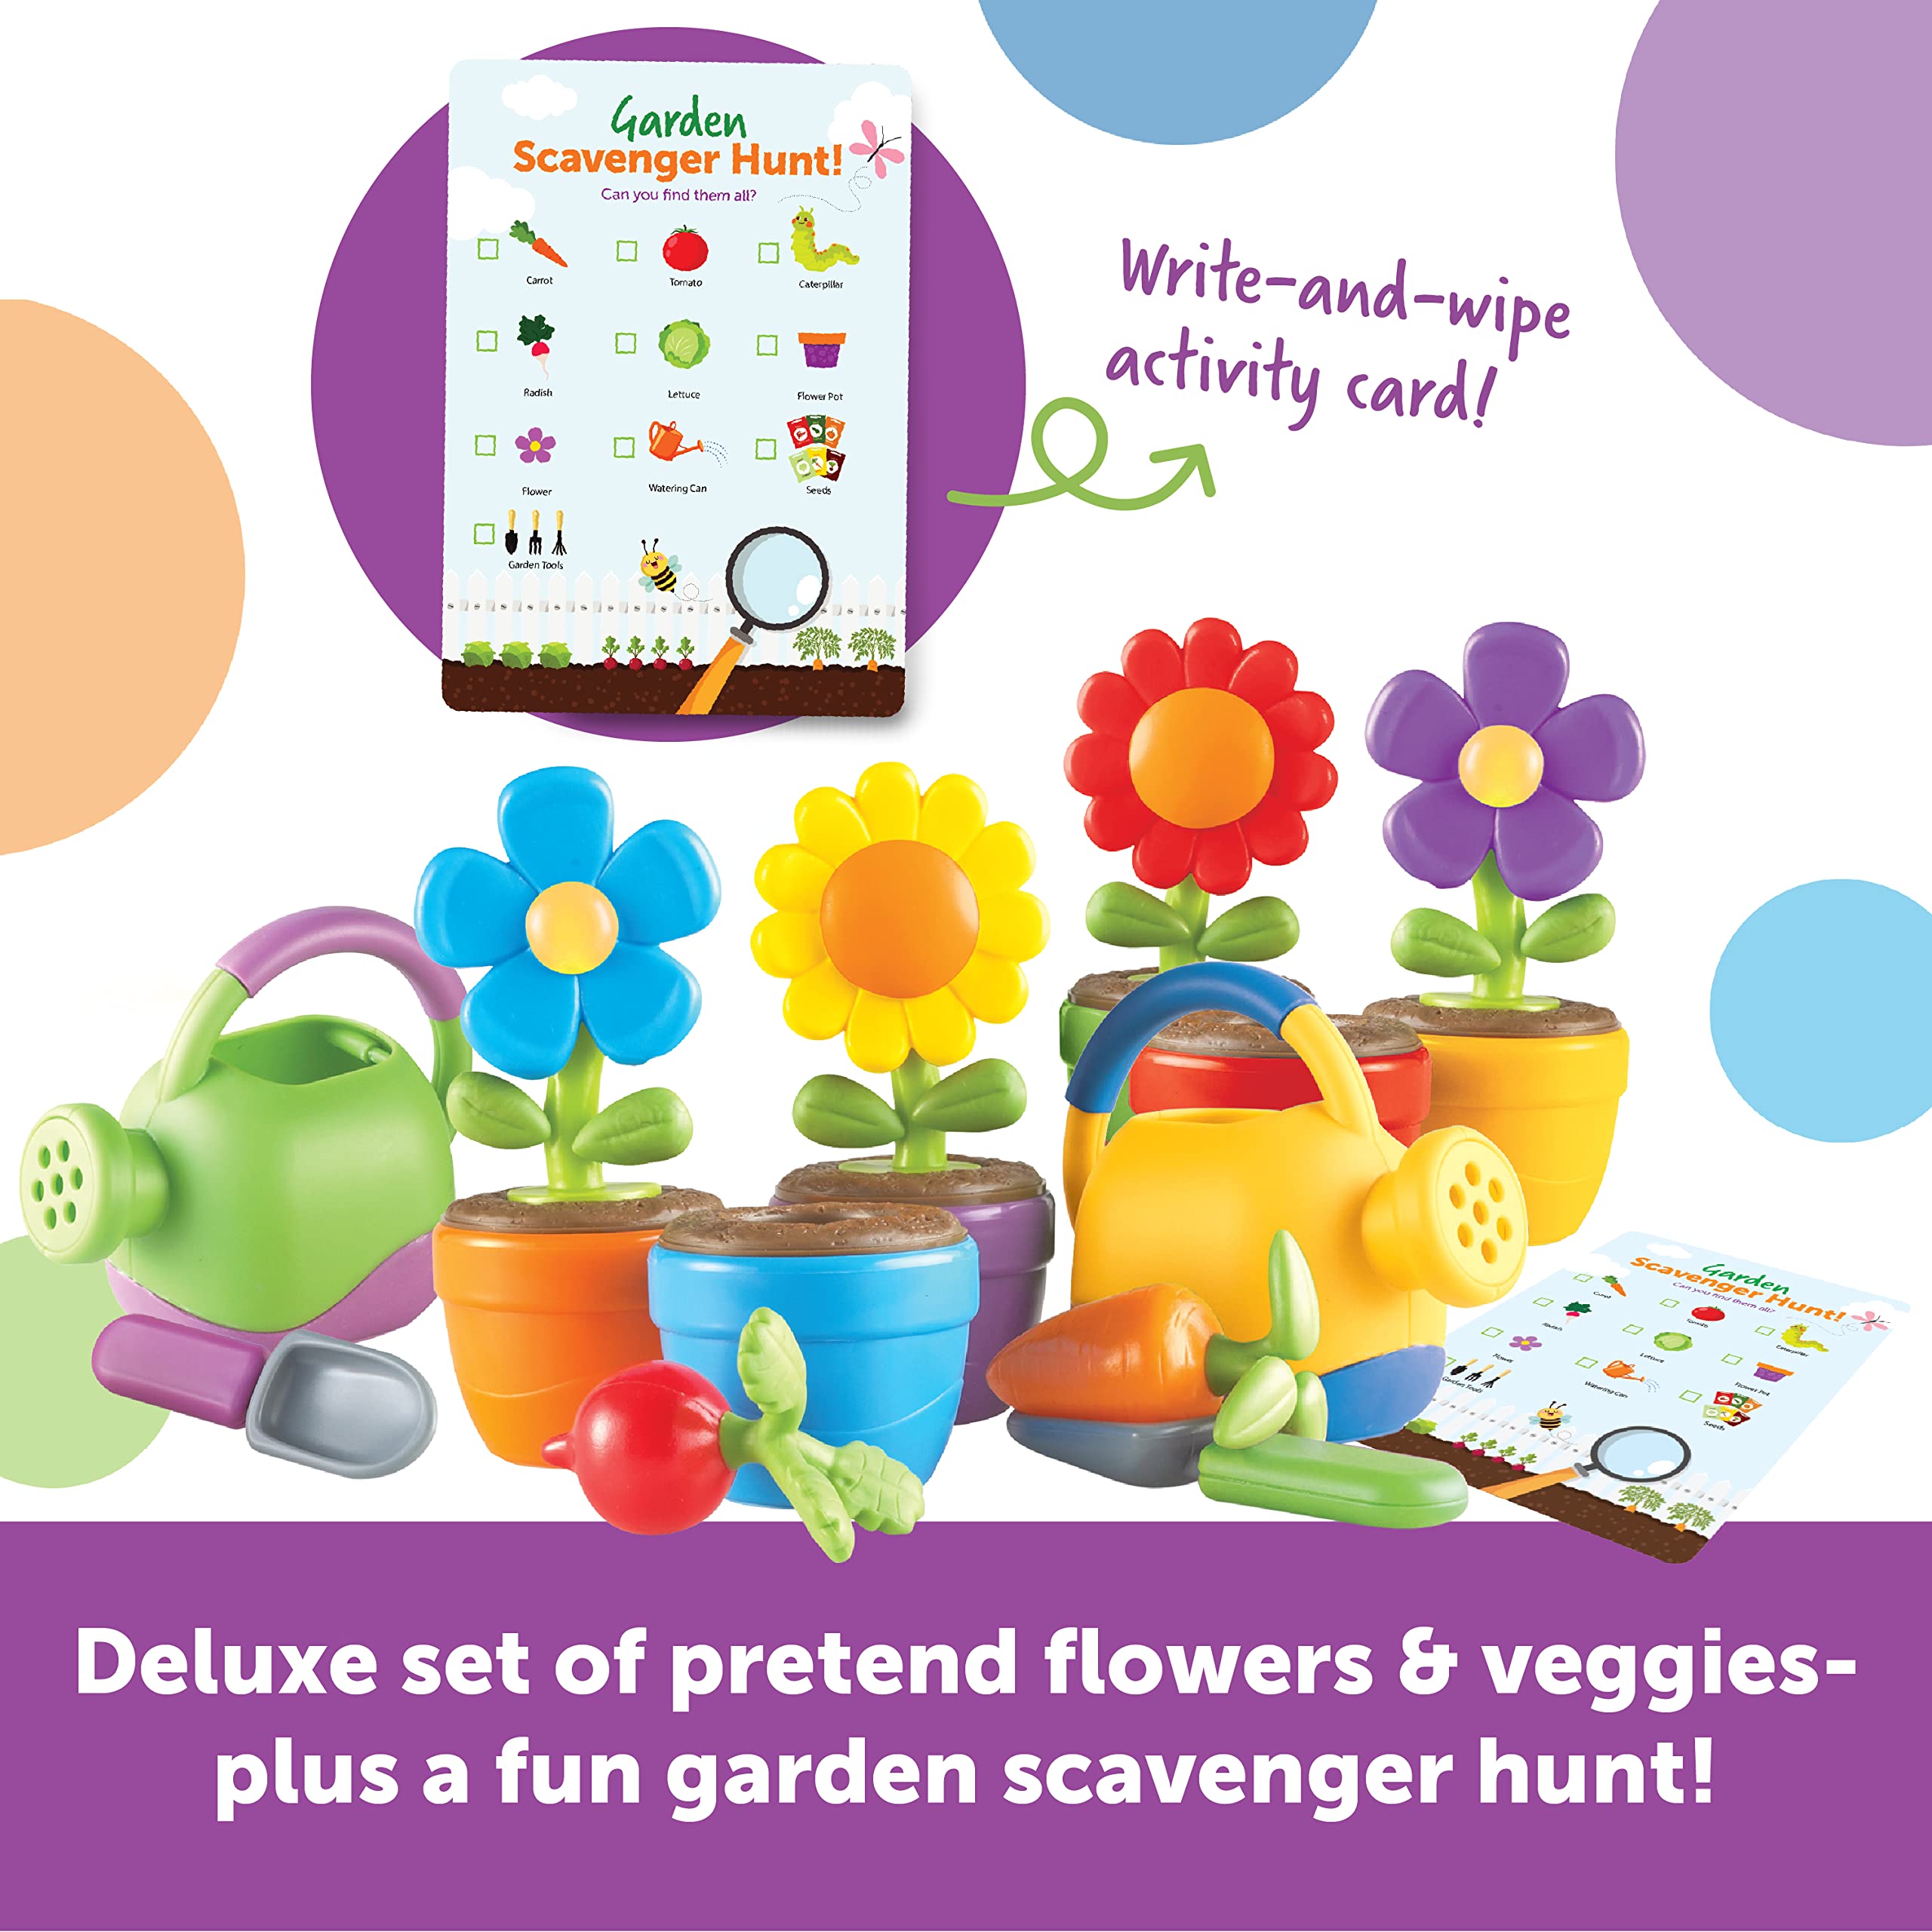 Learning Resources Grow It Deluxe Garden - 17 Pieces, Ages 2+ Toddler Learning Toy, Spring and Easter Toys for Kids, Easter Basket for Toddlers